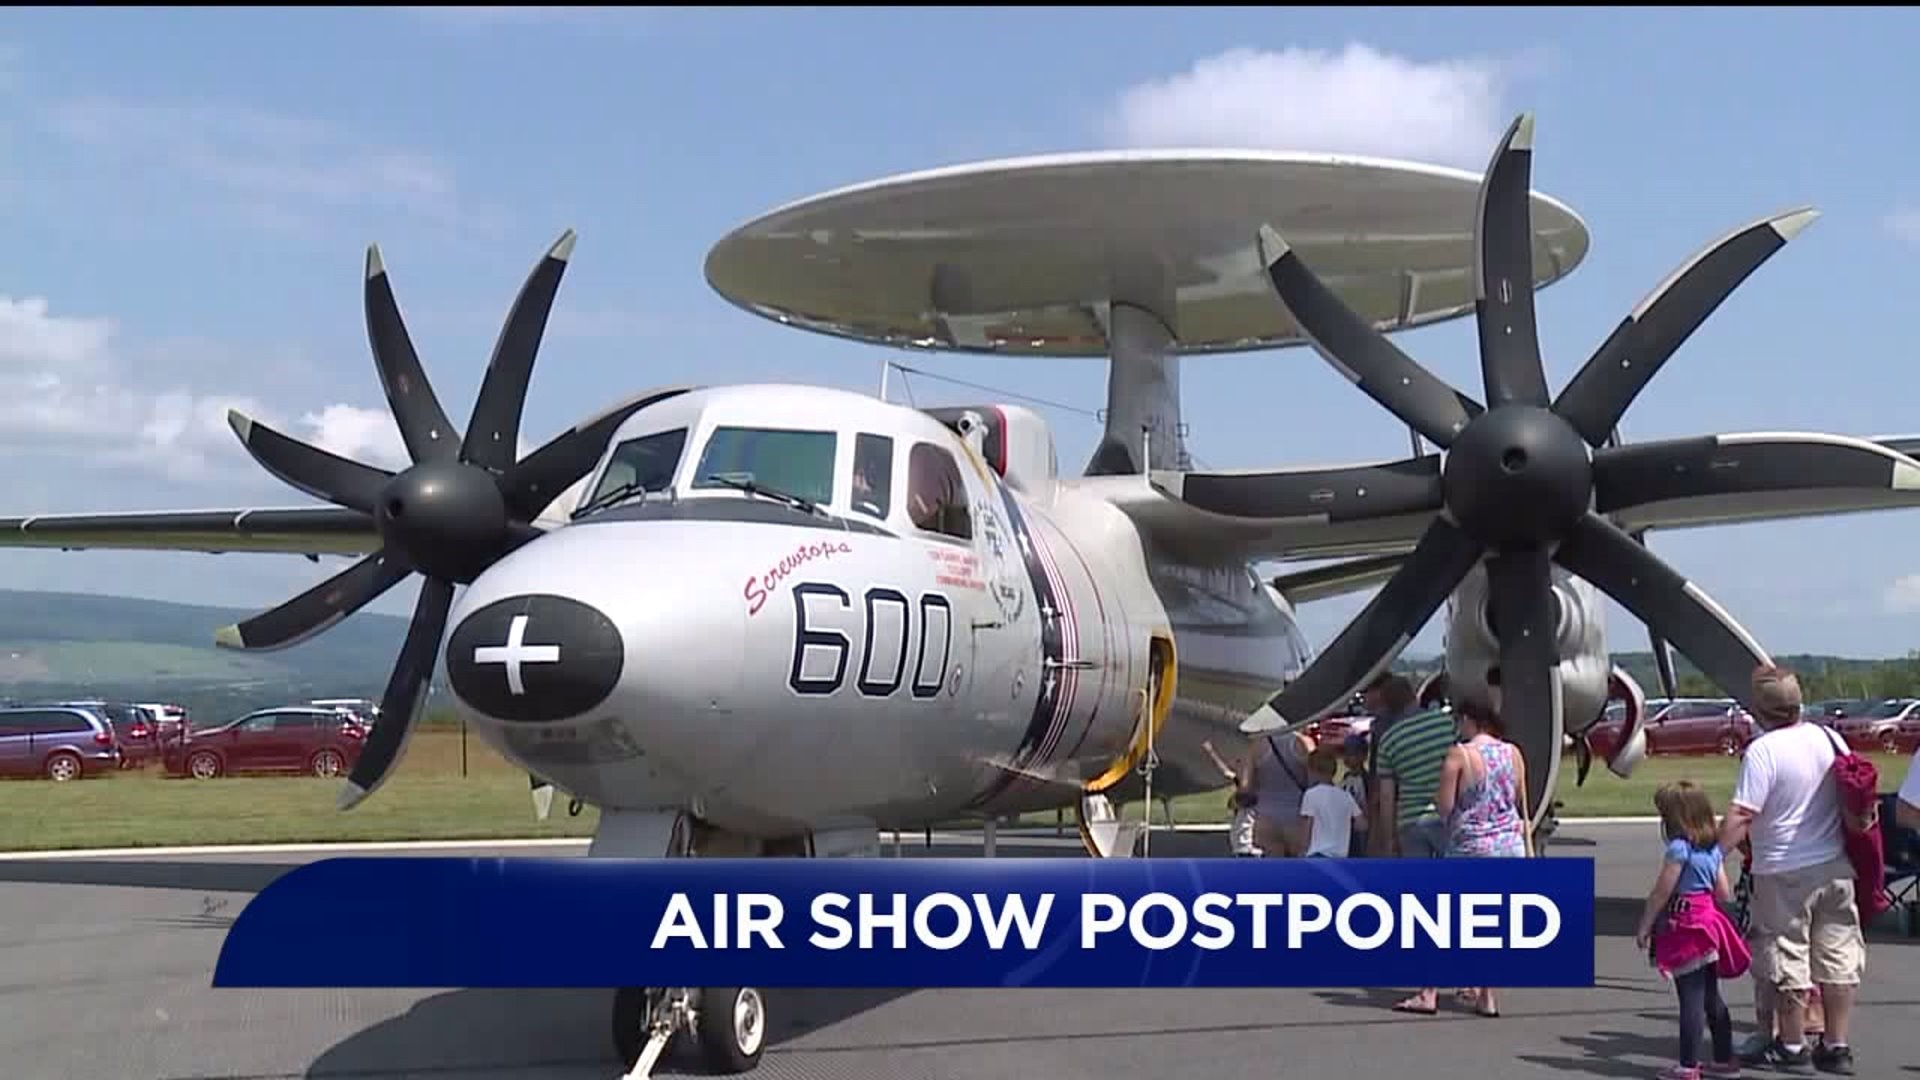 Air Show Planned for 2019 Canceled; Rescheduled to 2020